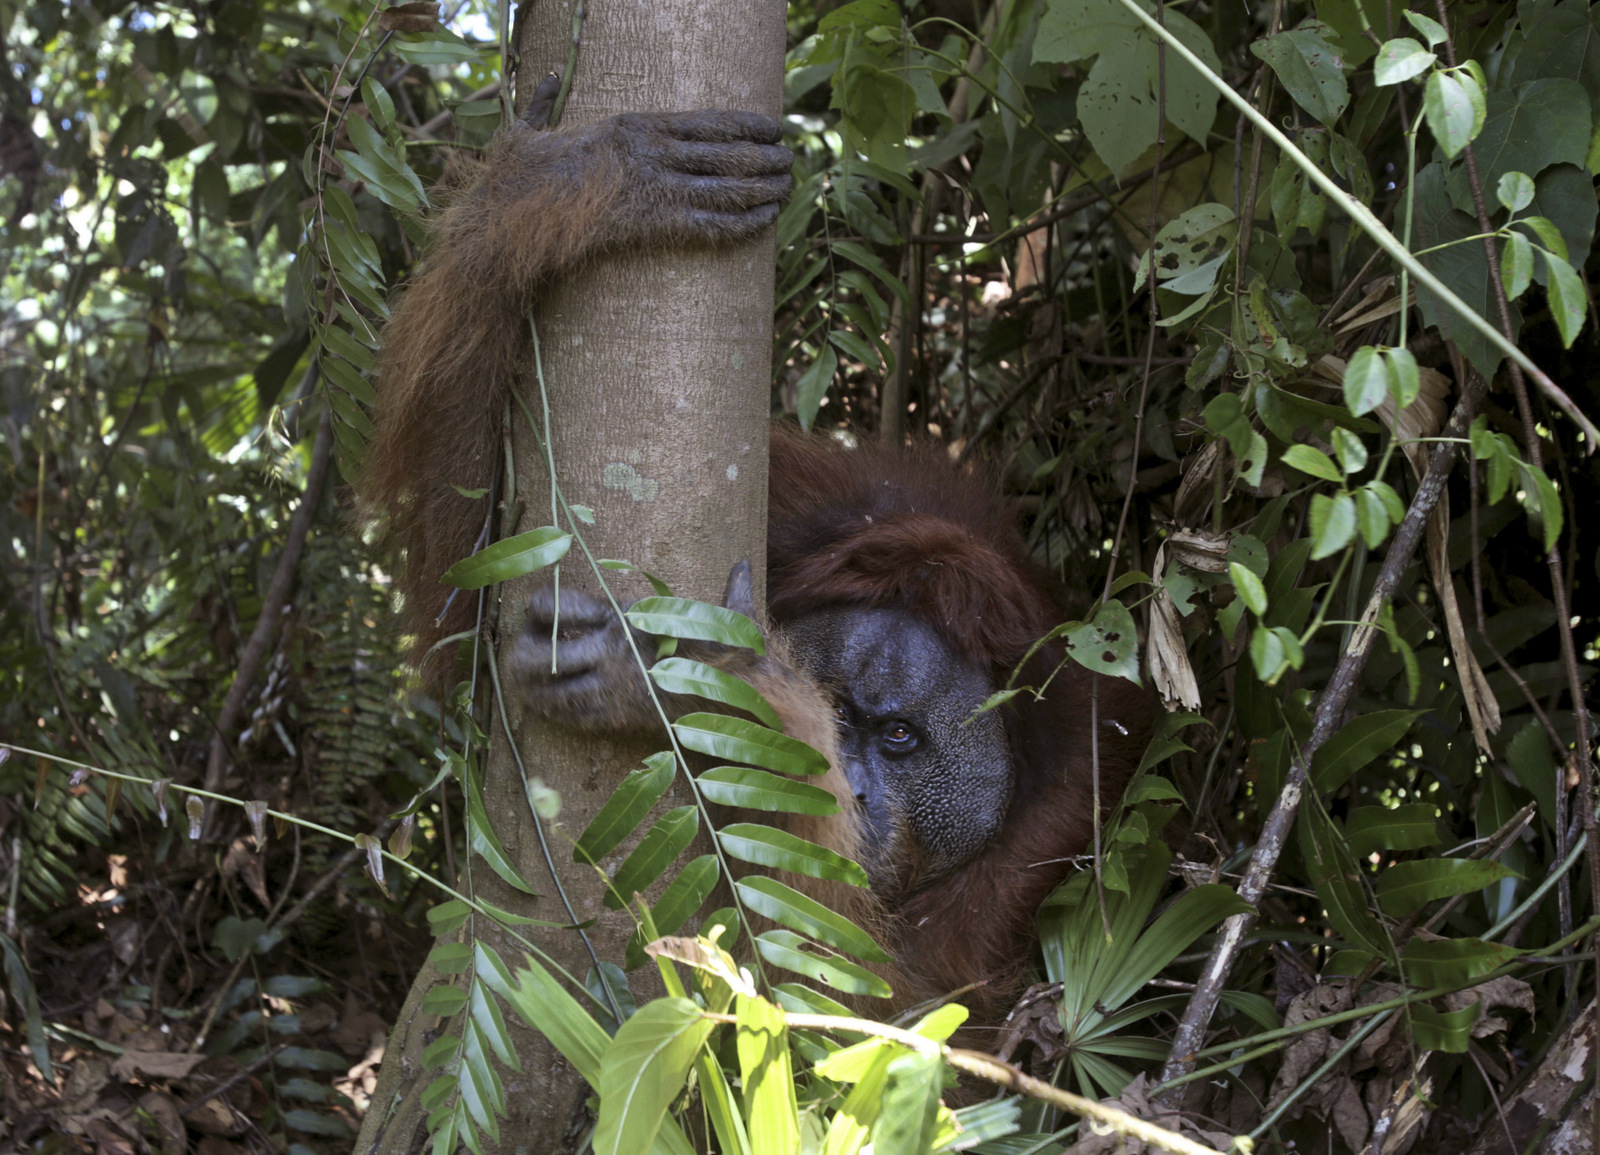 In this Thursday, Aug. 10, 2017 photo, a tranquilized male orangutan holds on to a tree as it's being rescued from a swath of forest located too close to a palm oil plantation at Tripa peat swamp in Aceh province, Indonesia. Conservationists from Sumatran Orangutan Conservation Program (SOCP) relocated the orangutan they named "Black" to a reintroduction center in Jantho, Aceh Besar where he will join about 100 other primates that have been released in the jungle there to establish a new wild population. (AP Photo/Binsar Bakkara)